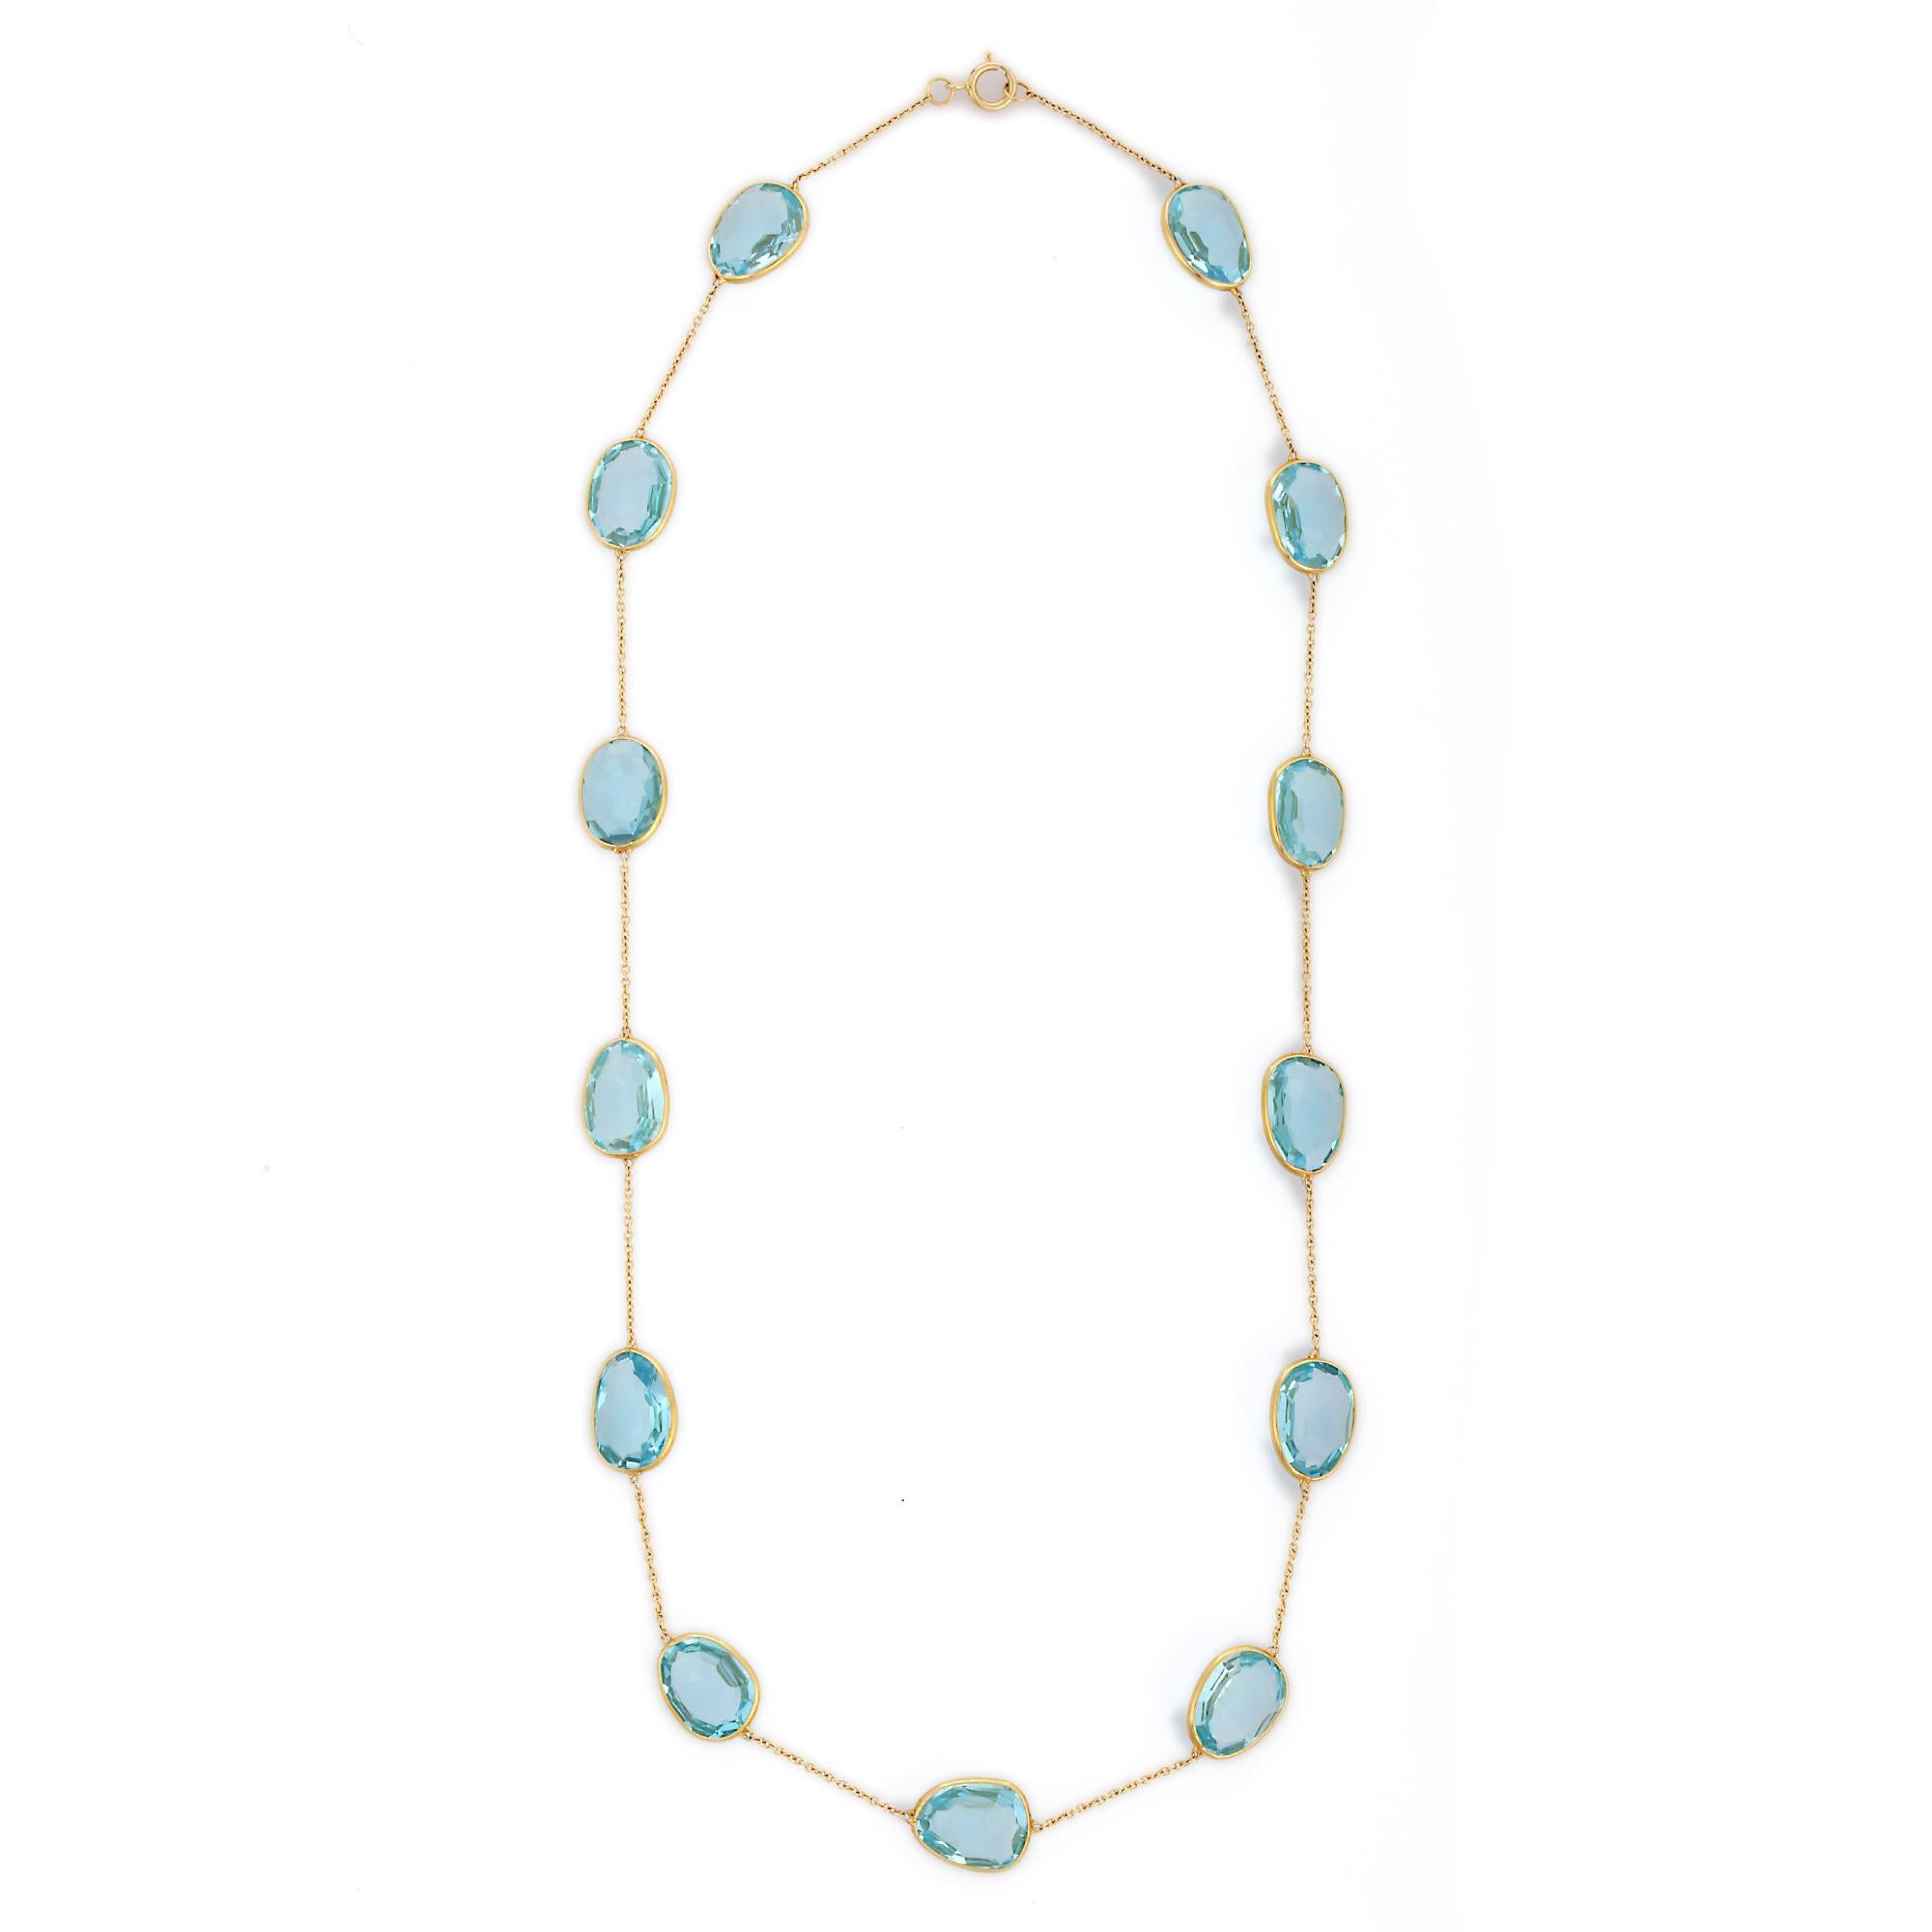 Oval Cut Delicate 47.55 Ct Blue Topaz Chain Necklace, 18K Yellow Gold Necklace For Sale